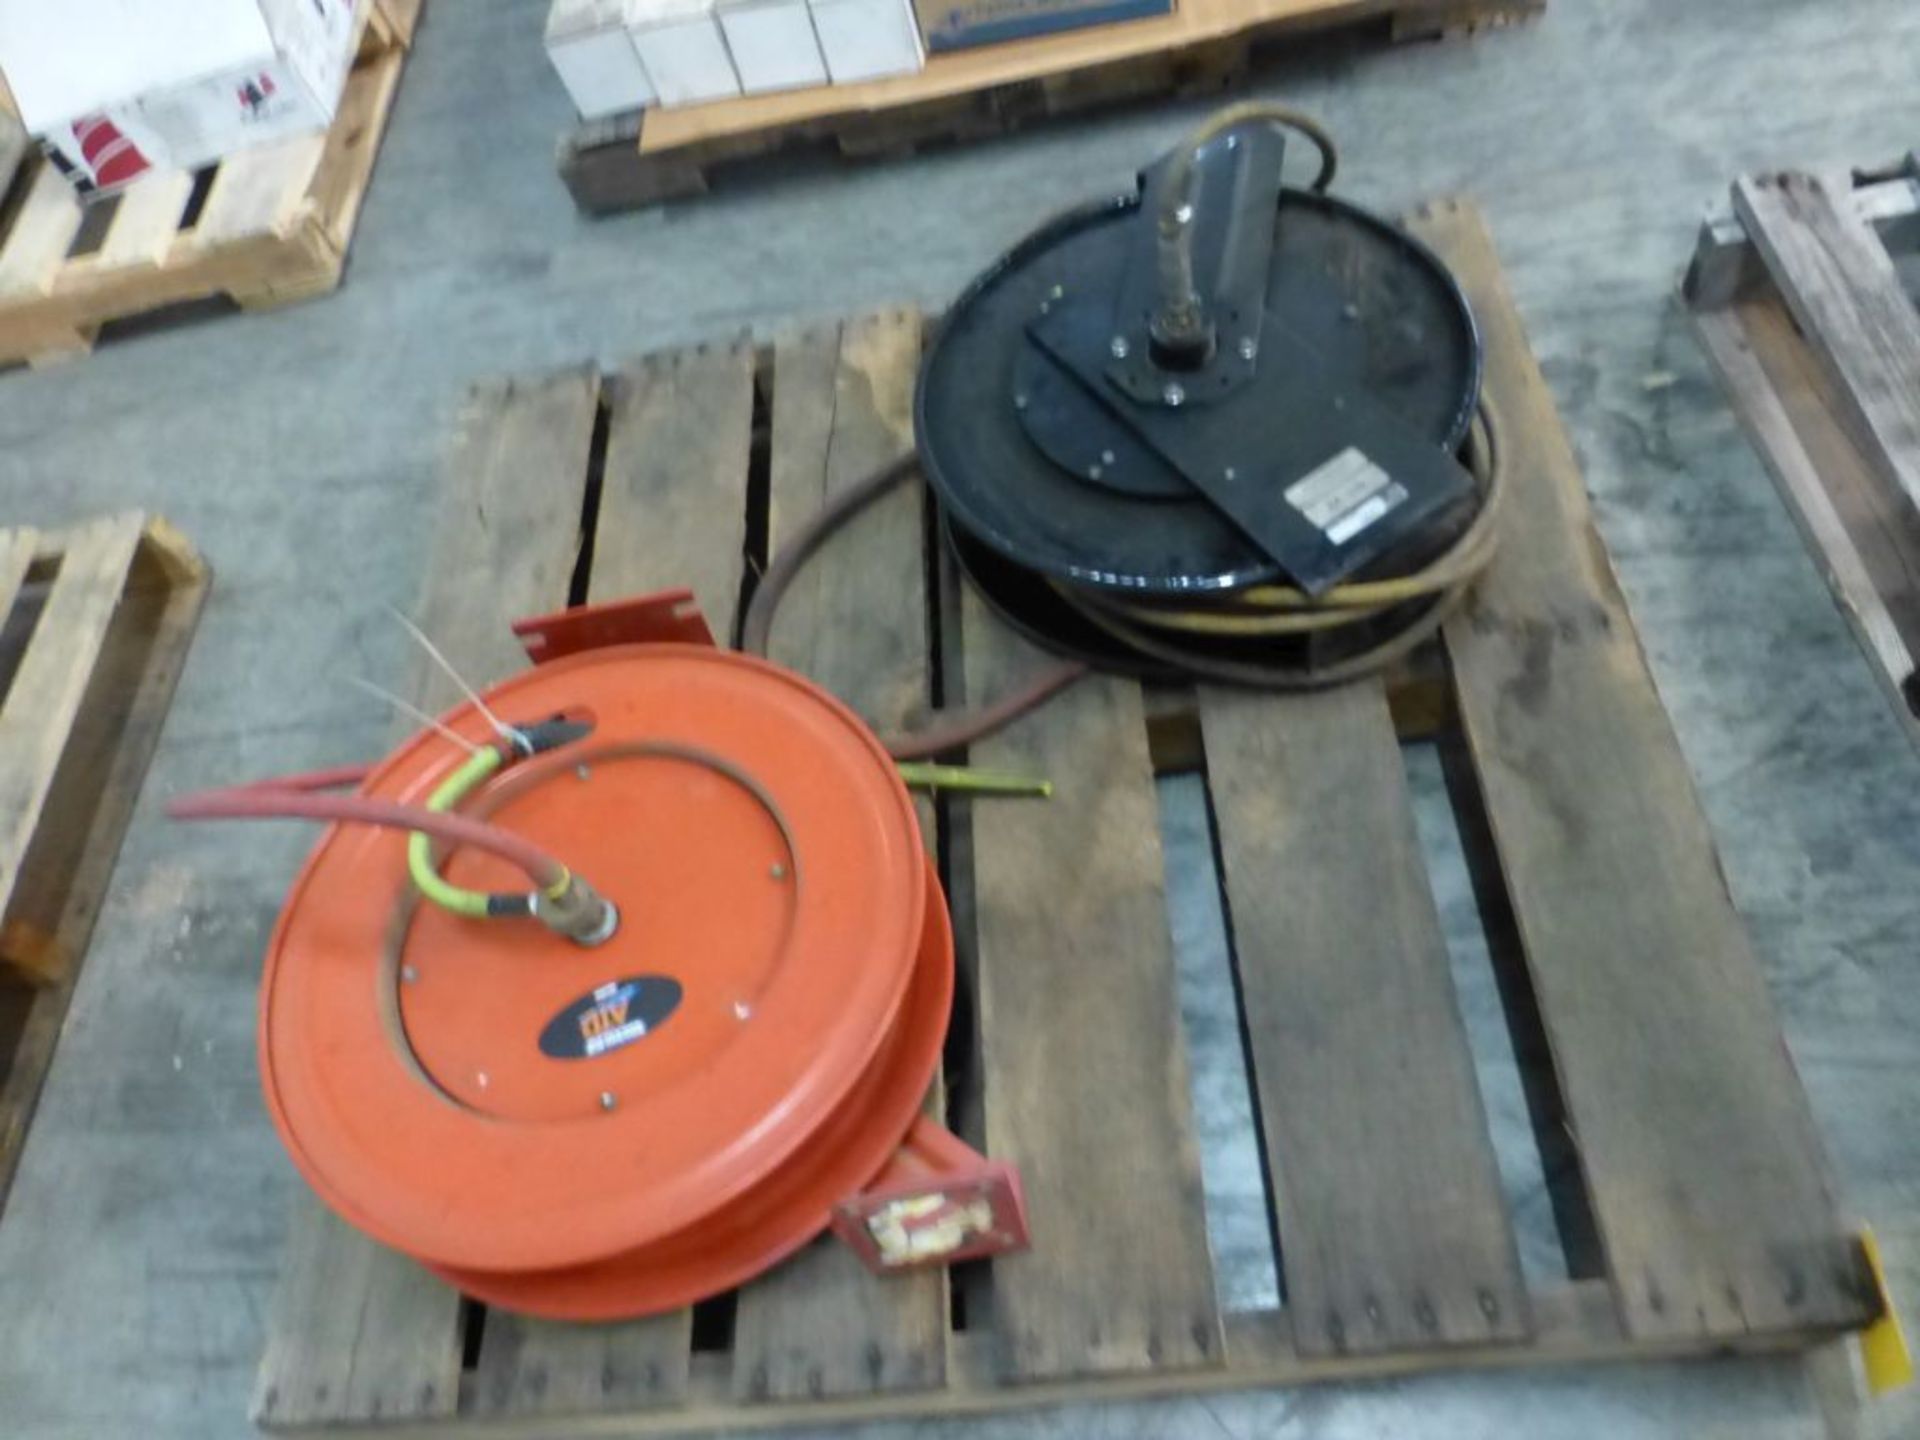 Lot of (2) Assorted Air Hose Reels - (1) ATD Part No. ATD-31166; (1) Hosetract Model No. IC-350; - Image 2 of 8